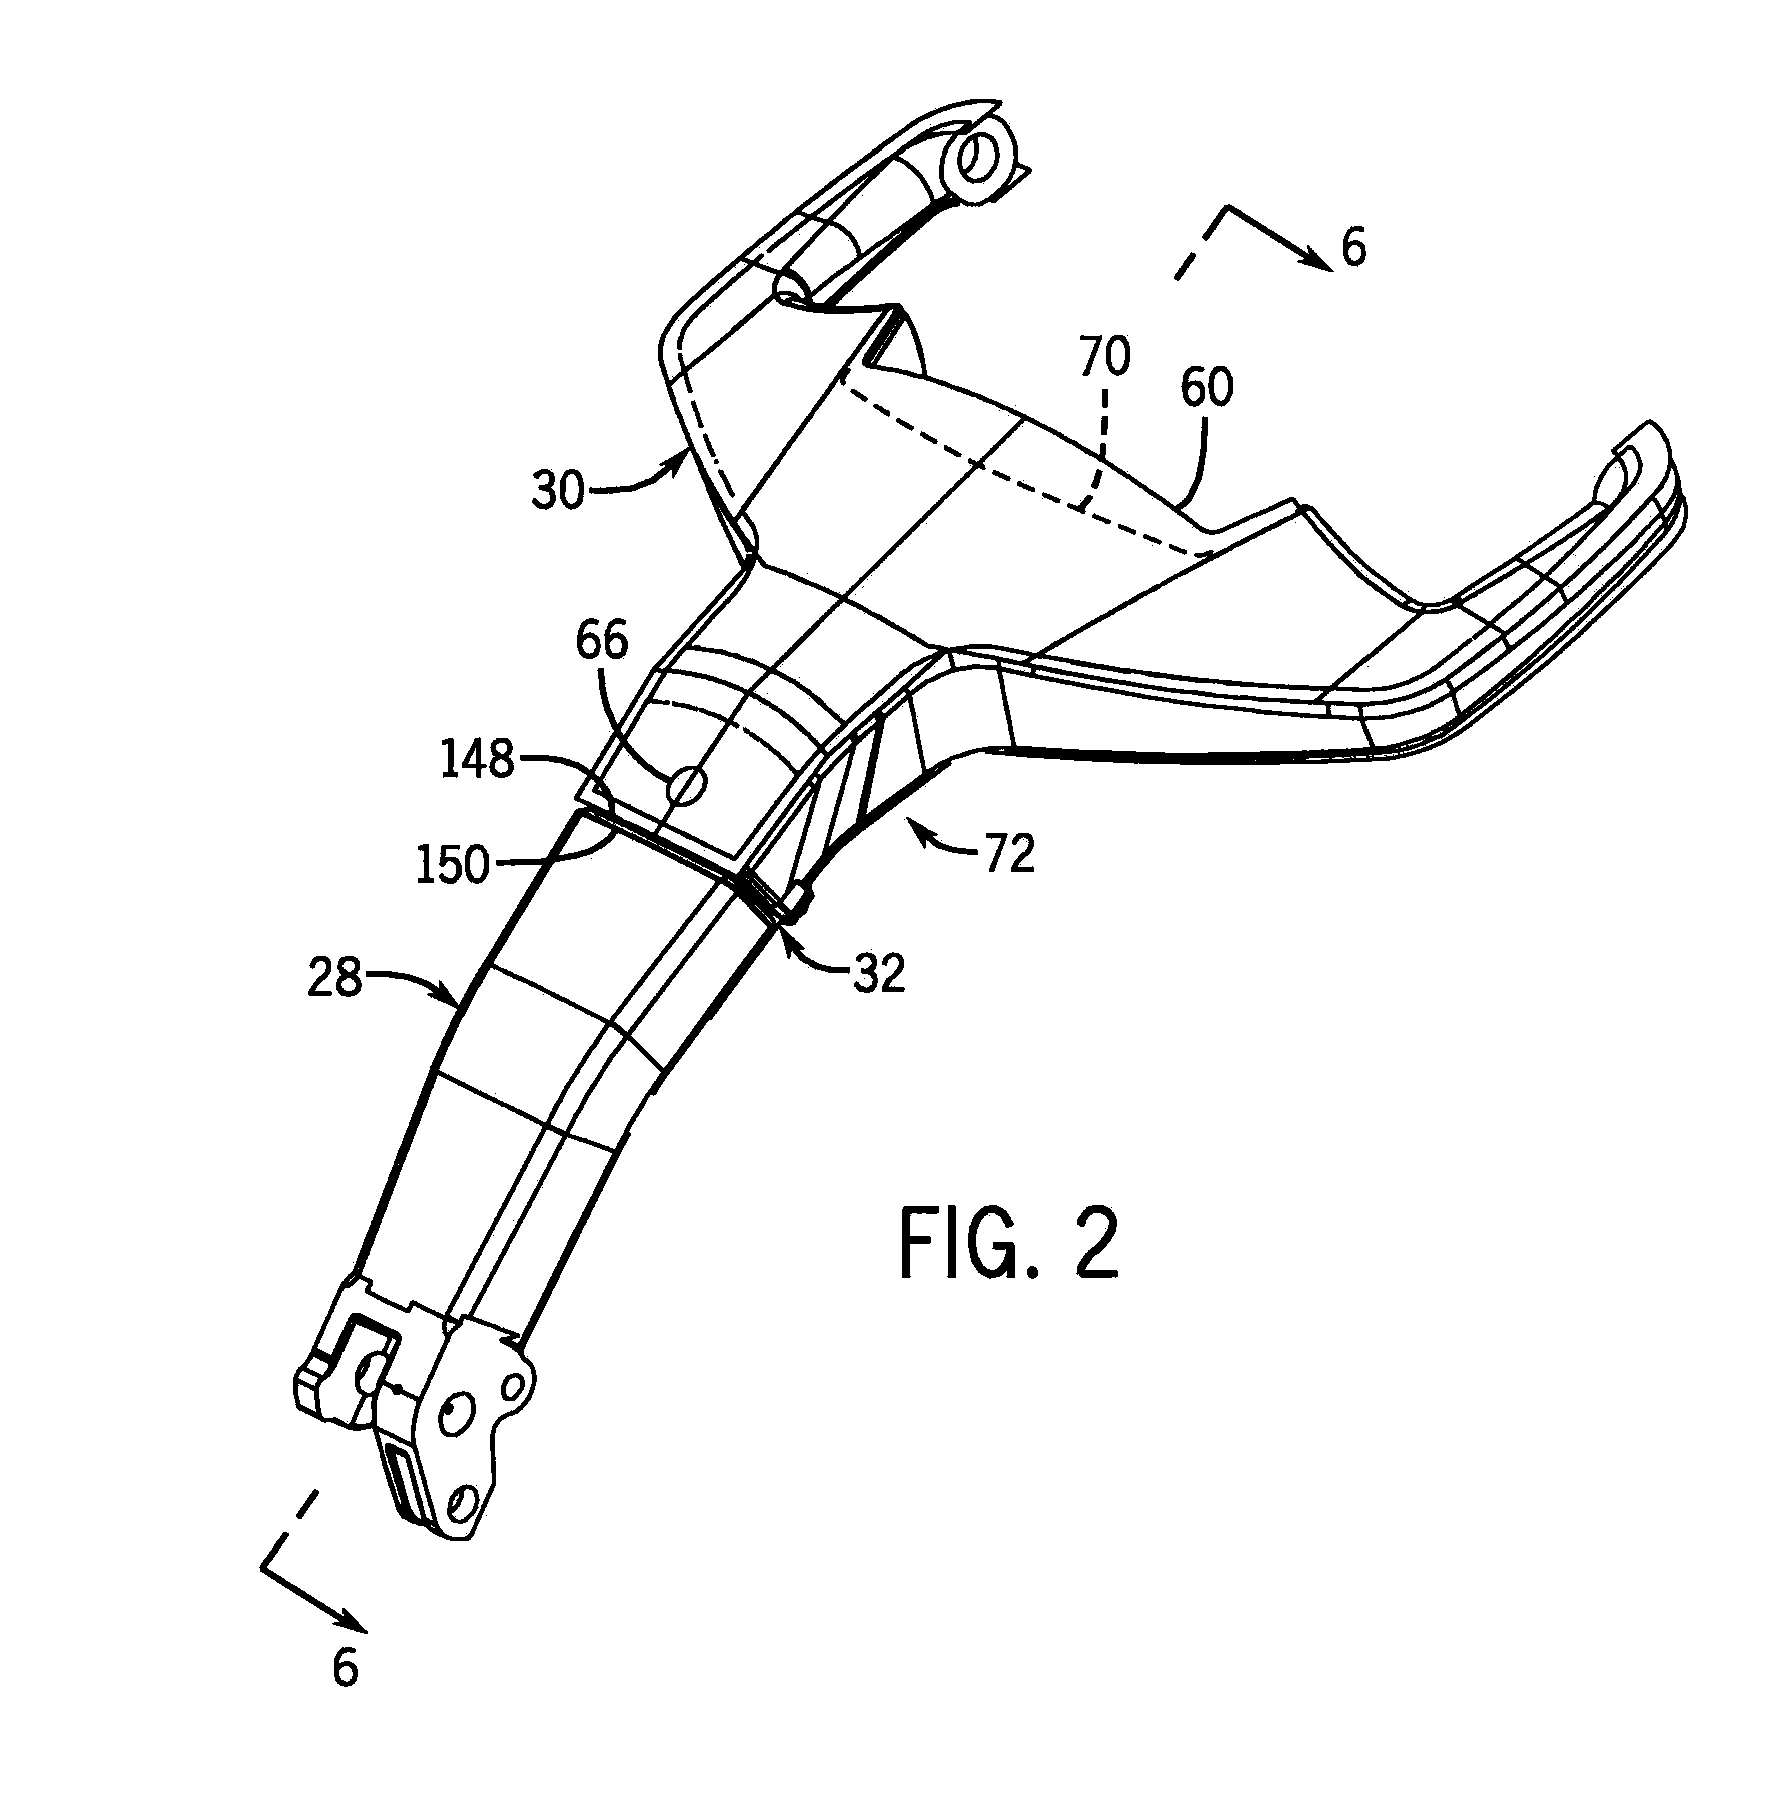 Self-centering, torque-sensing joint assembly for a pallet truck power steering system